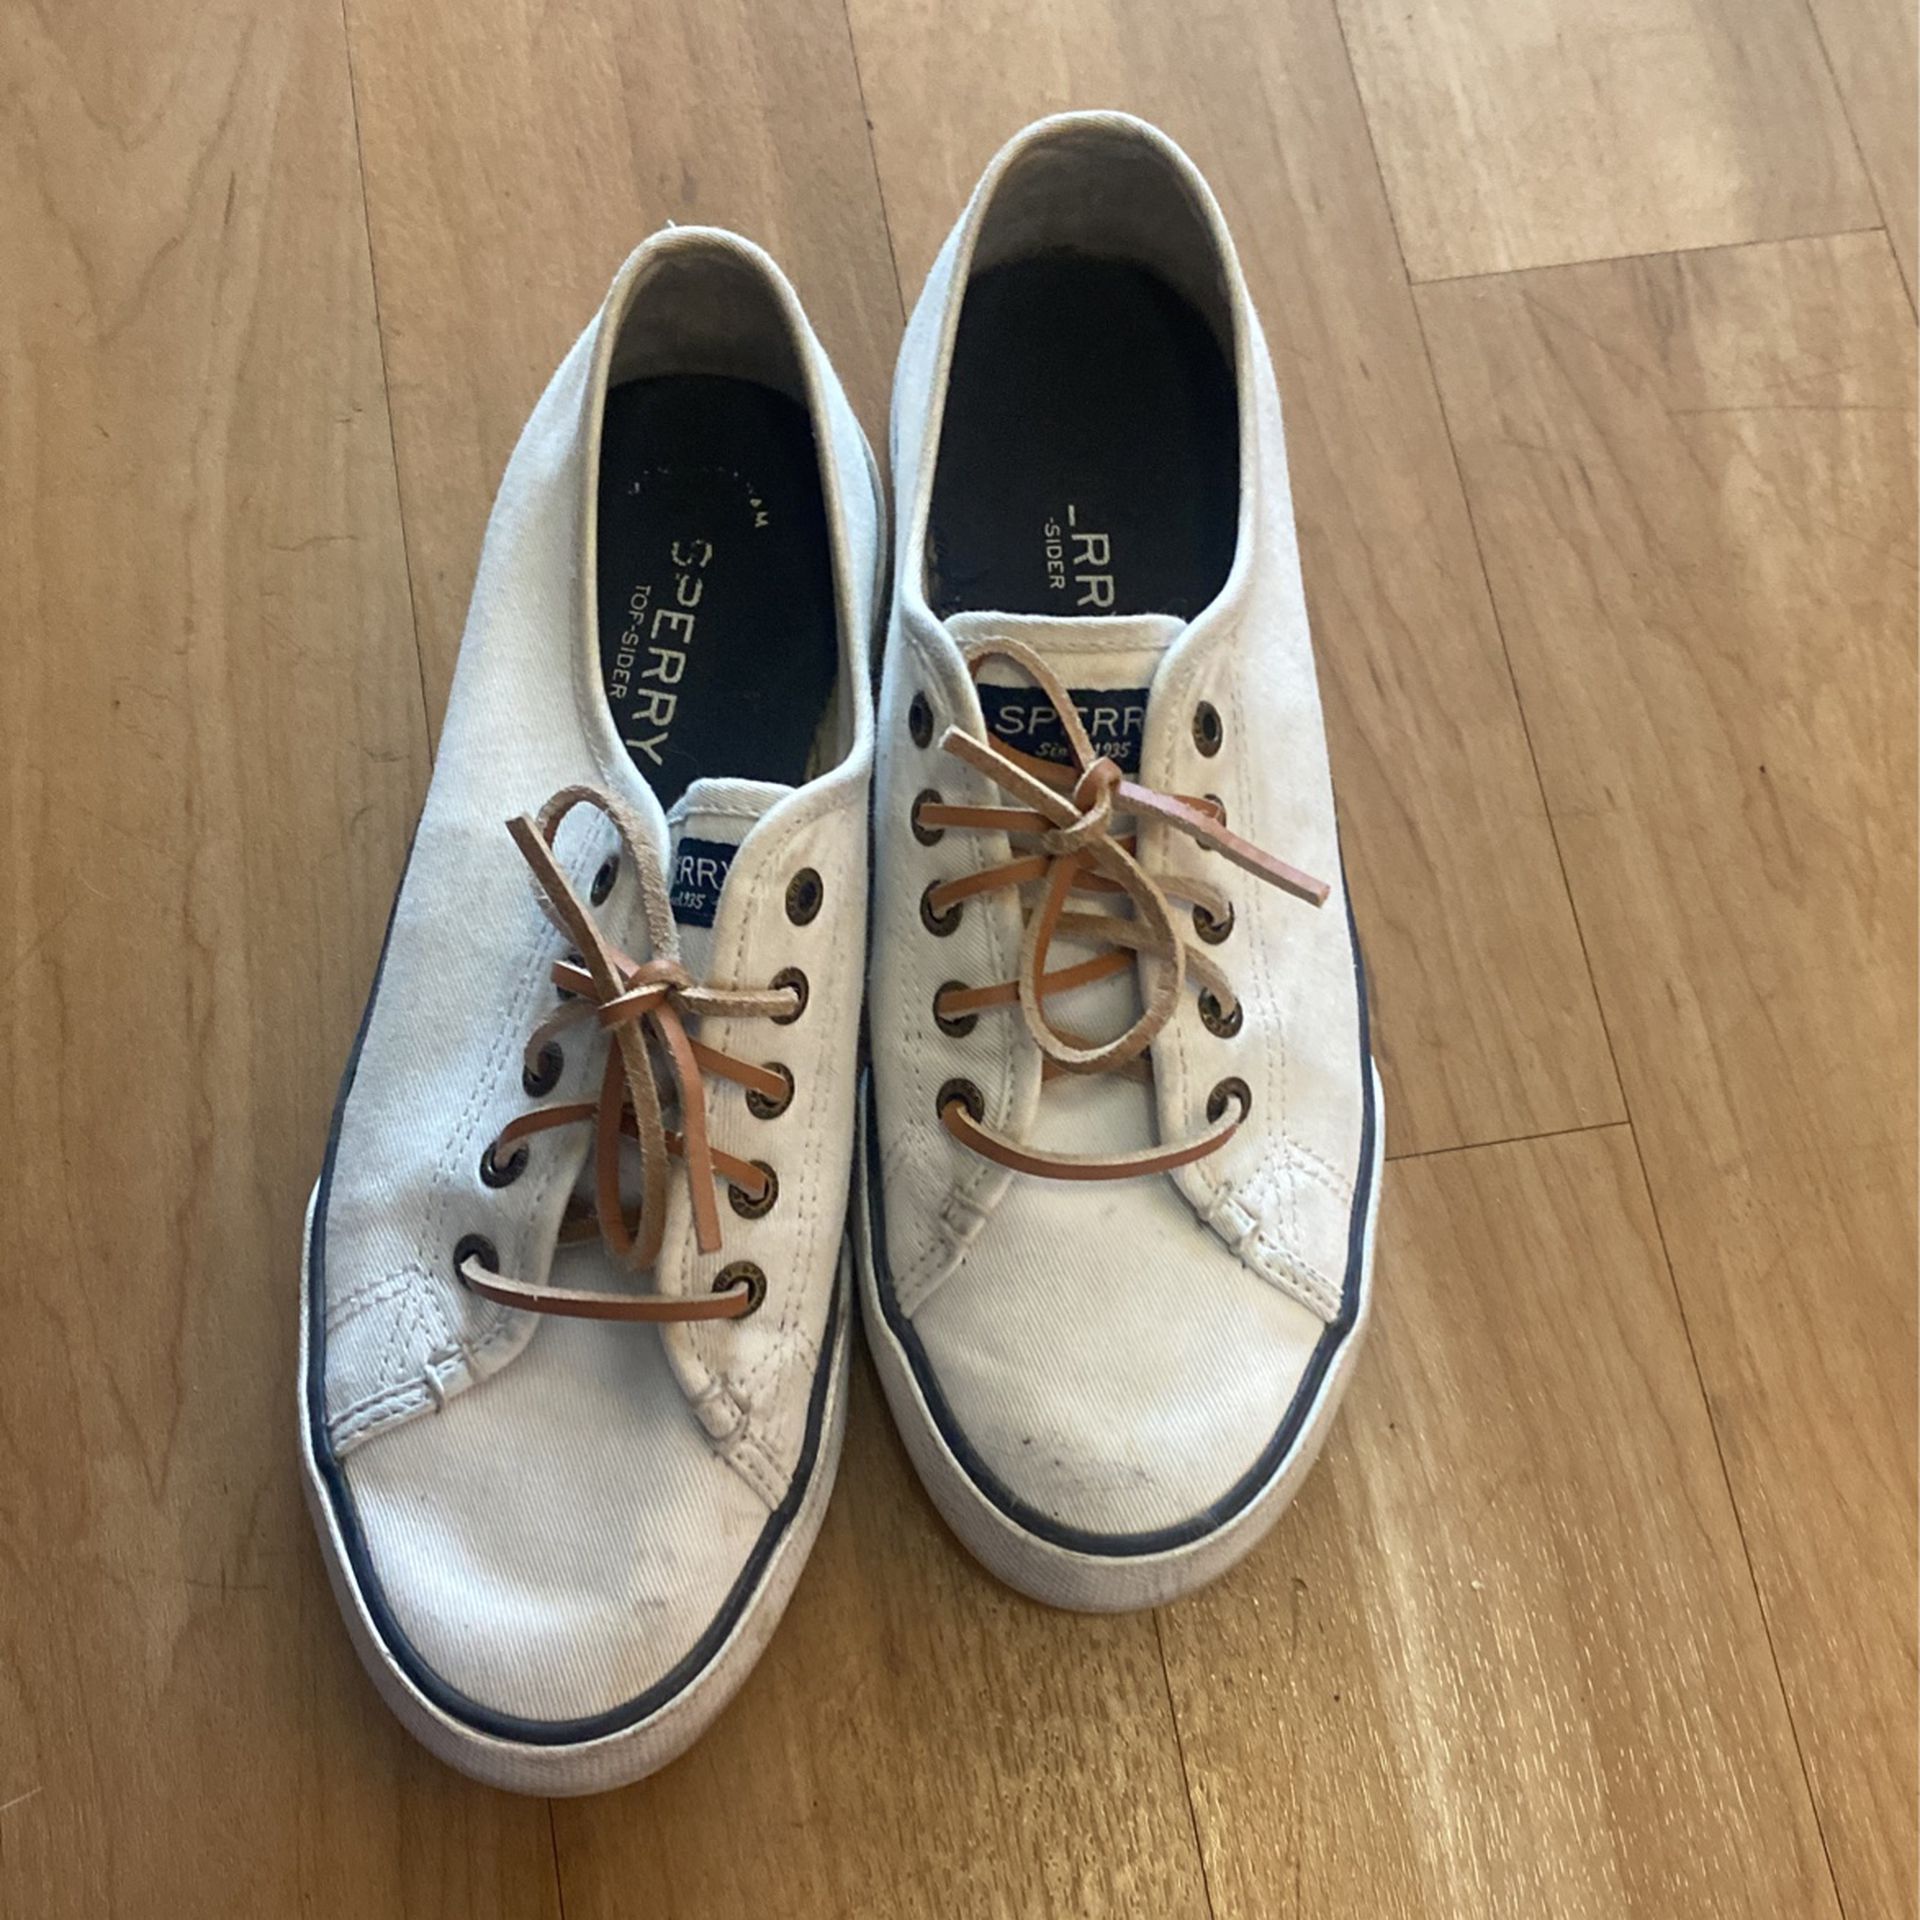 Sperry topsider Boat Shoes Women 7